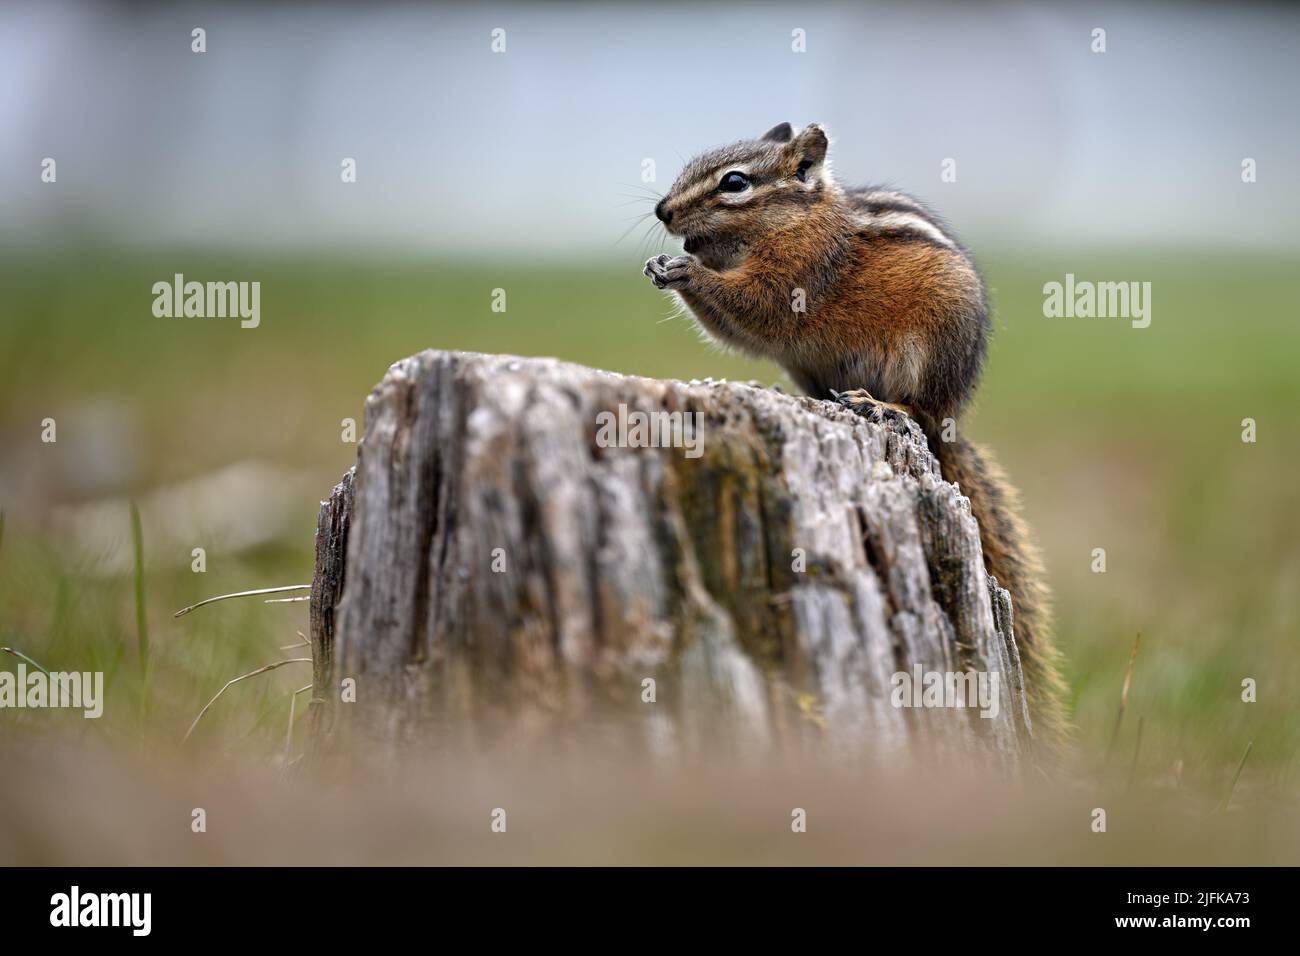 A cute and playful chipmunk running, jumping, sitting and eating on an old tree trunk in E. C. Manning Park, British Columbia, Canada. Stock Photo